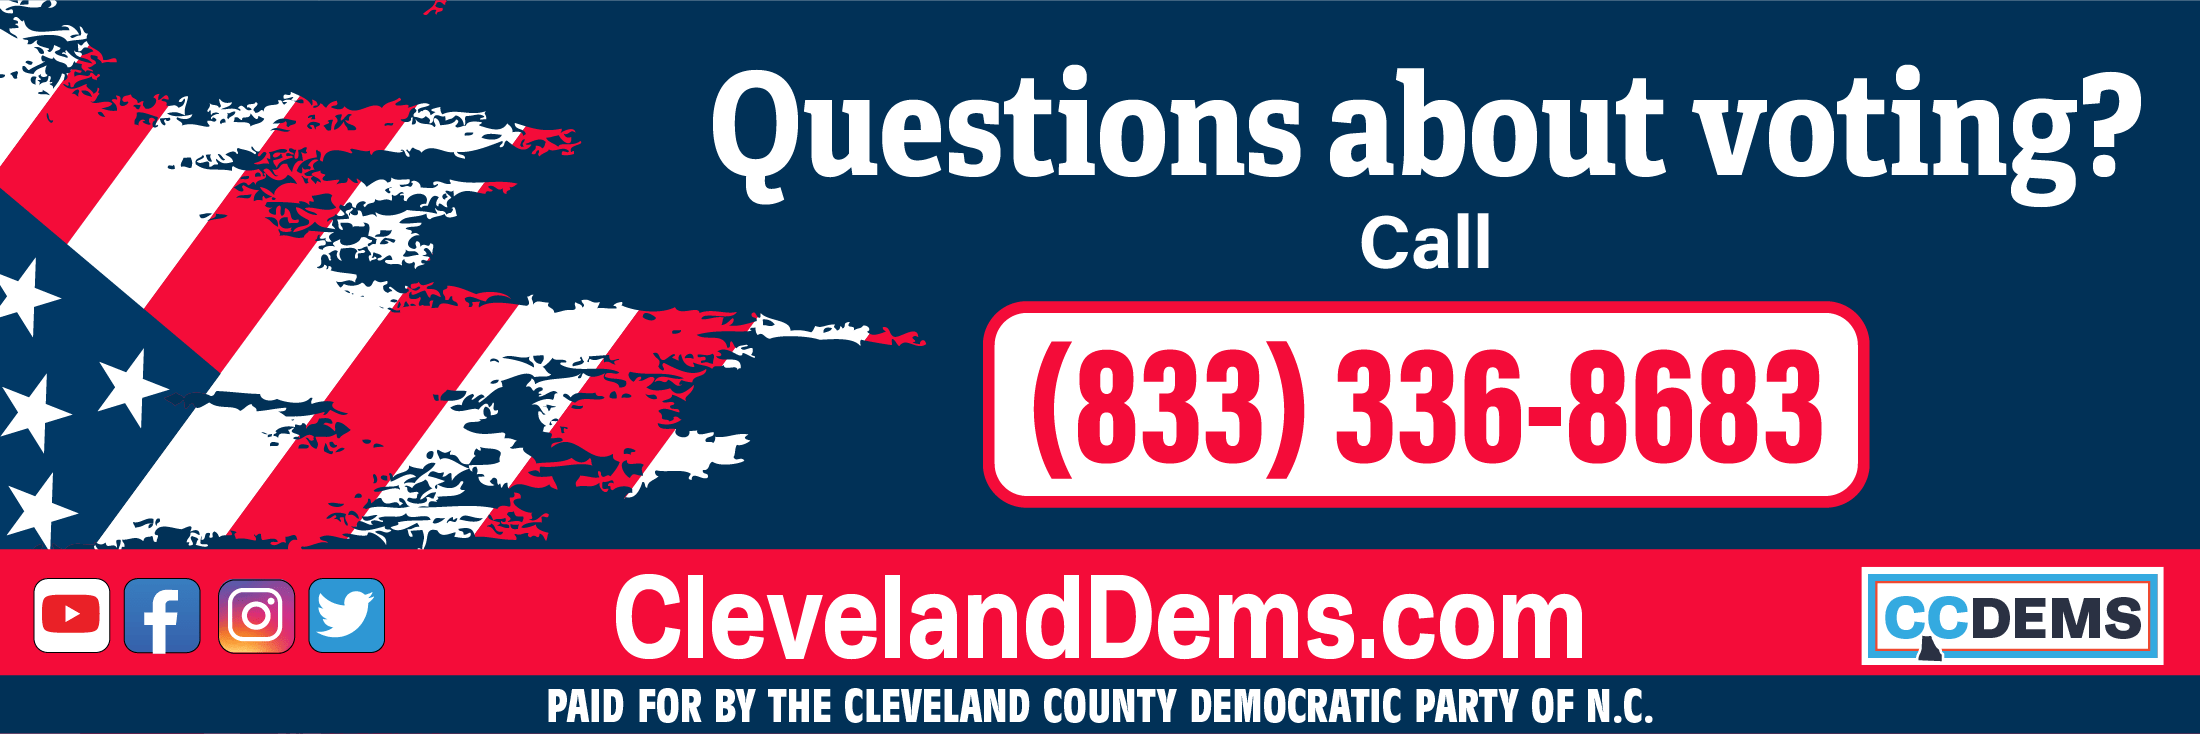 Questions about voting? Call (833) 336-8683.